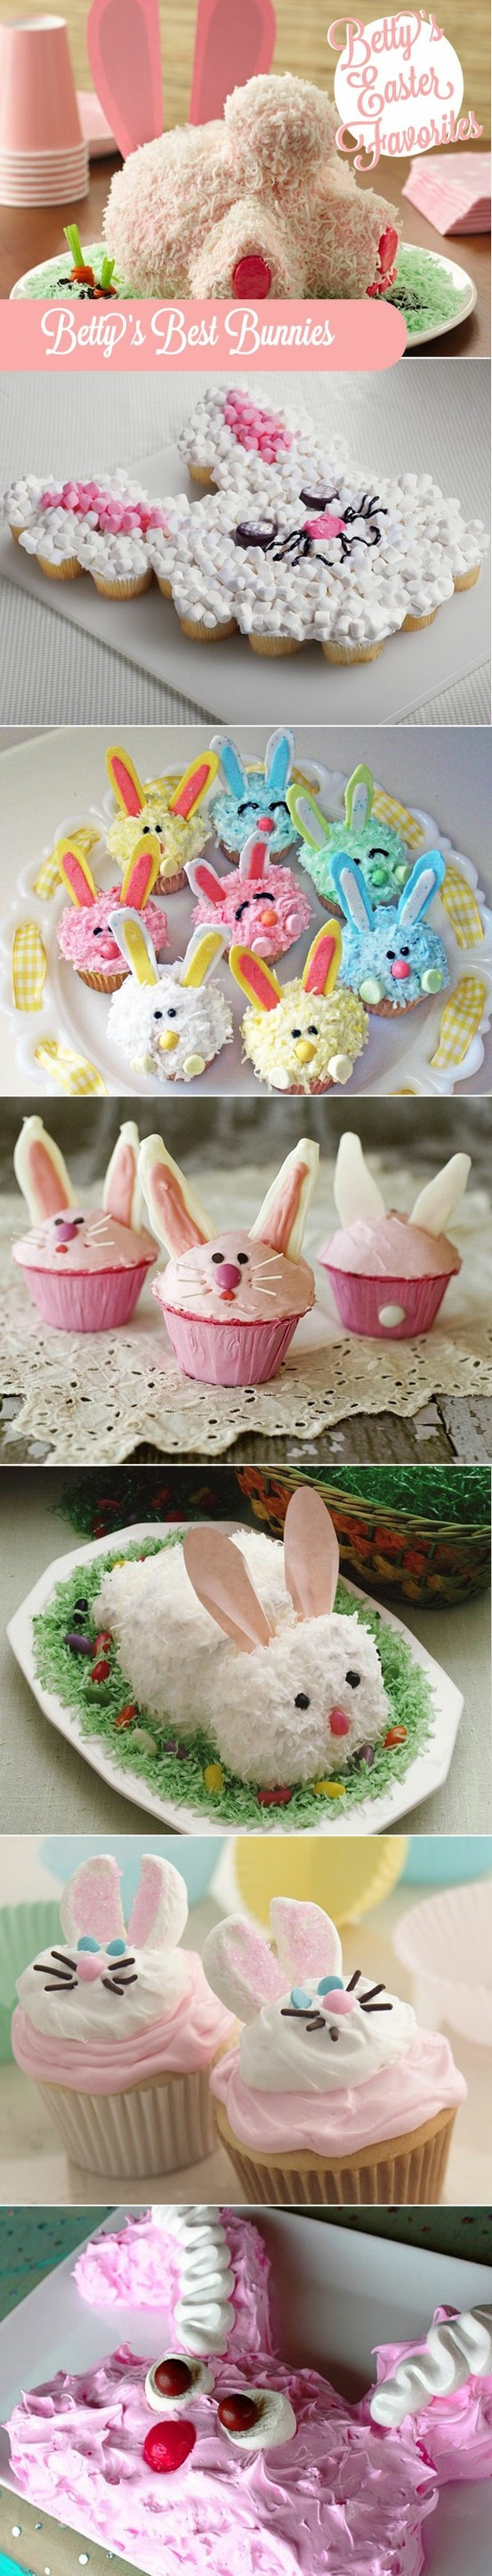 Popular Easter Desserts
 Betty s Best Bunny Cakes